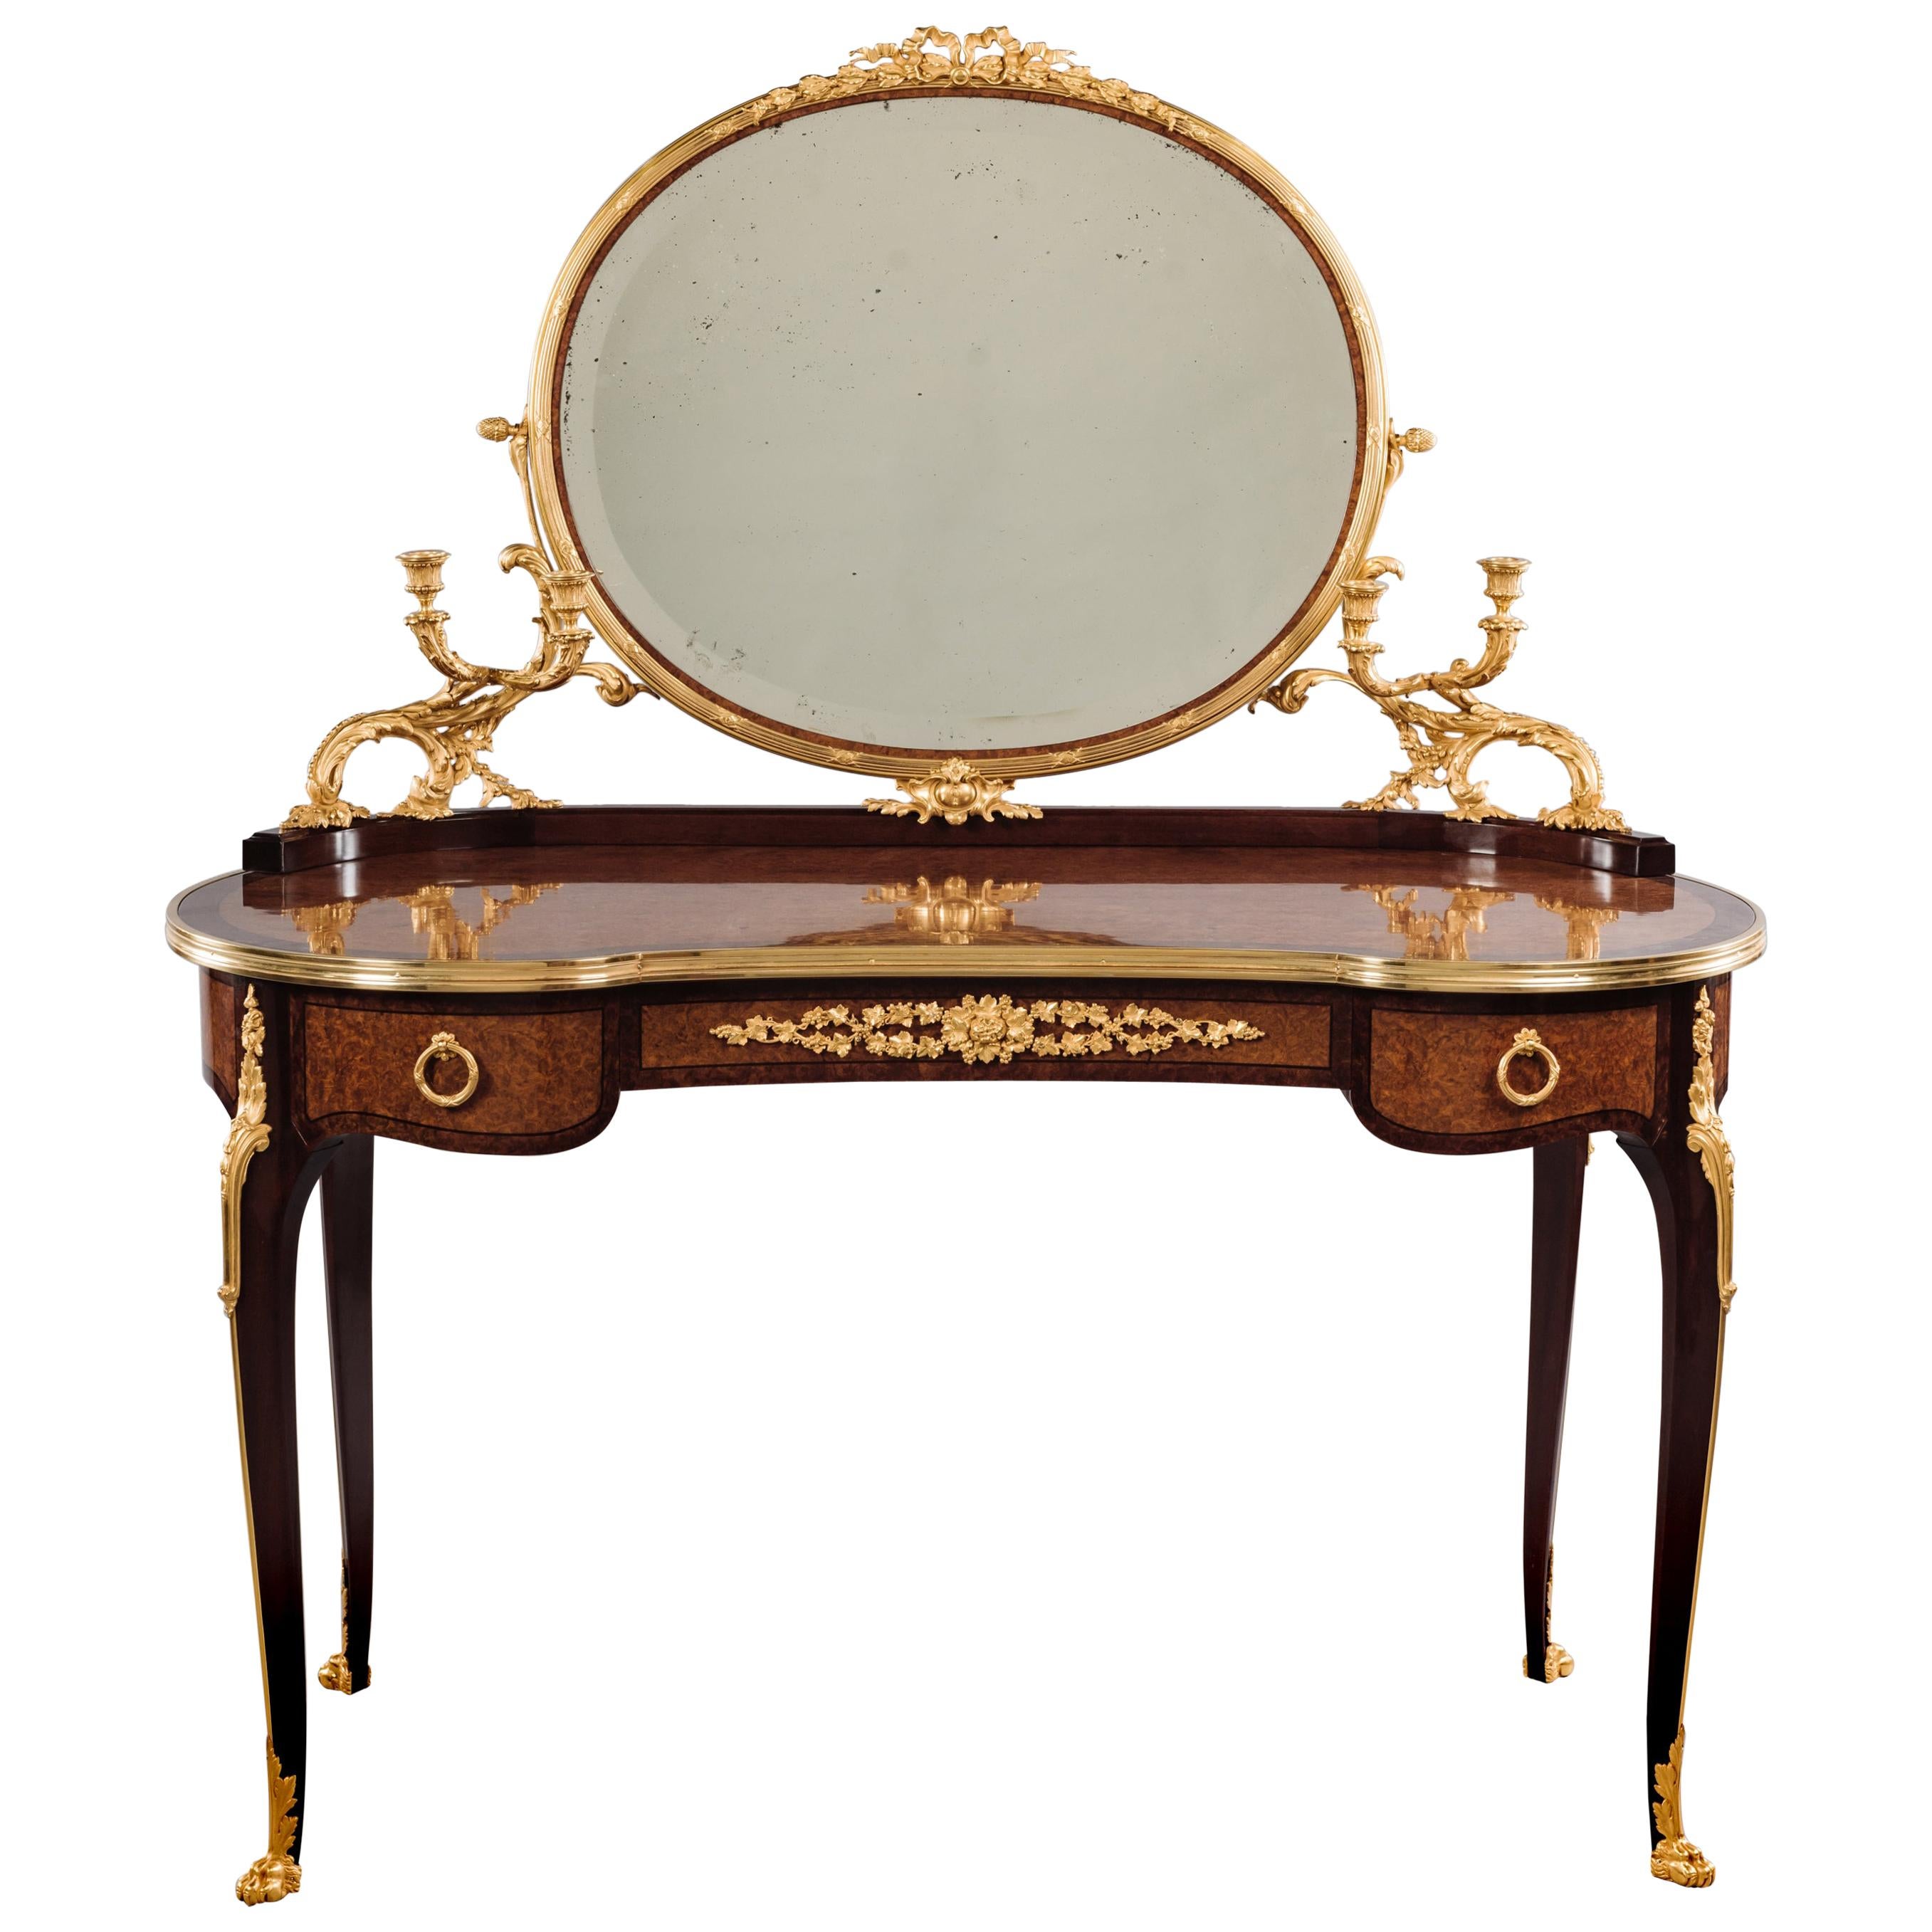 Transitional Style Dressing Table Attributed to François Linke, circa 1900